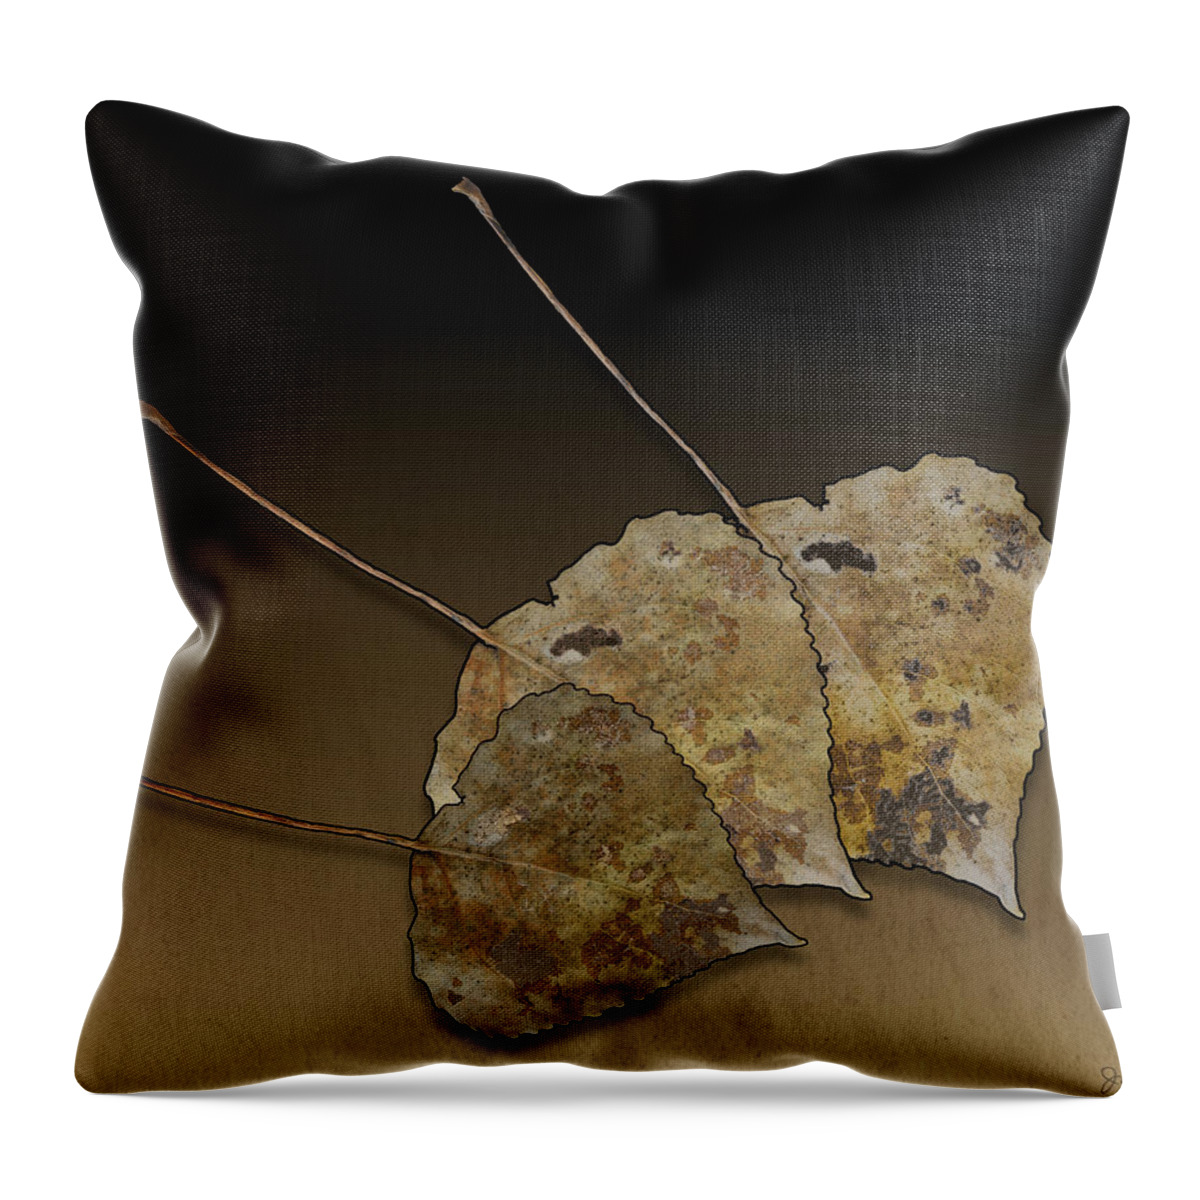 Leaves Throw Pillow featuring the photograph Decaying Leaves by Joe Bonita